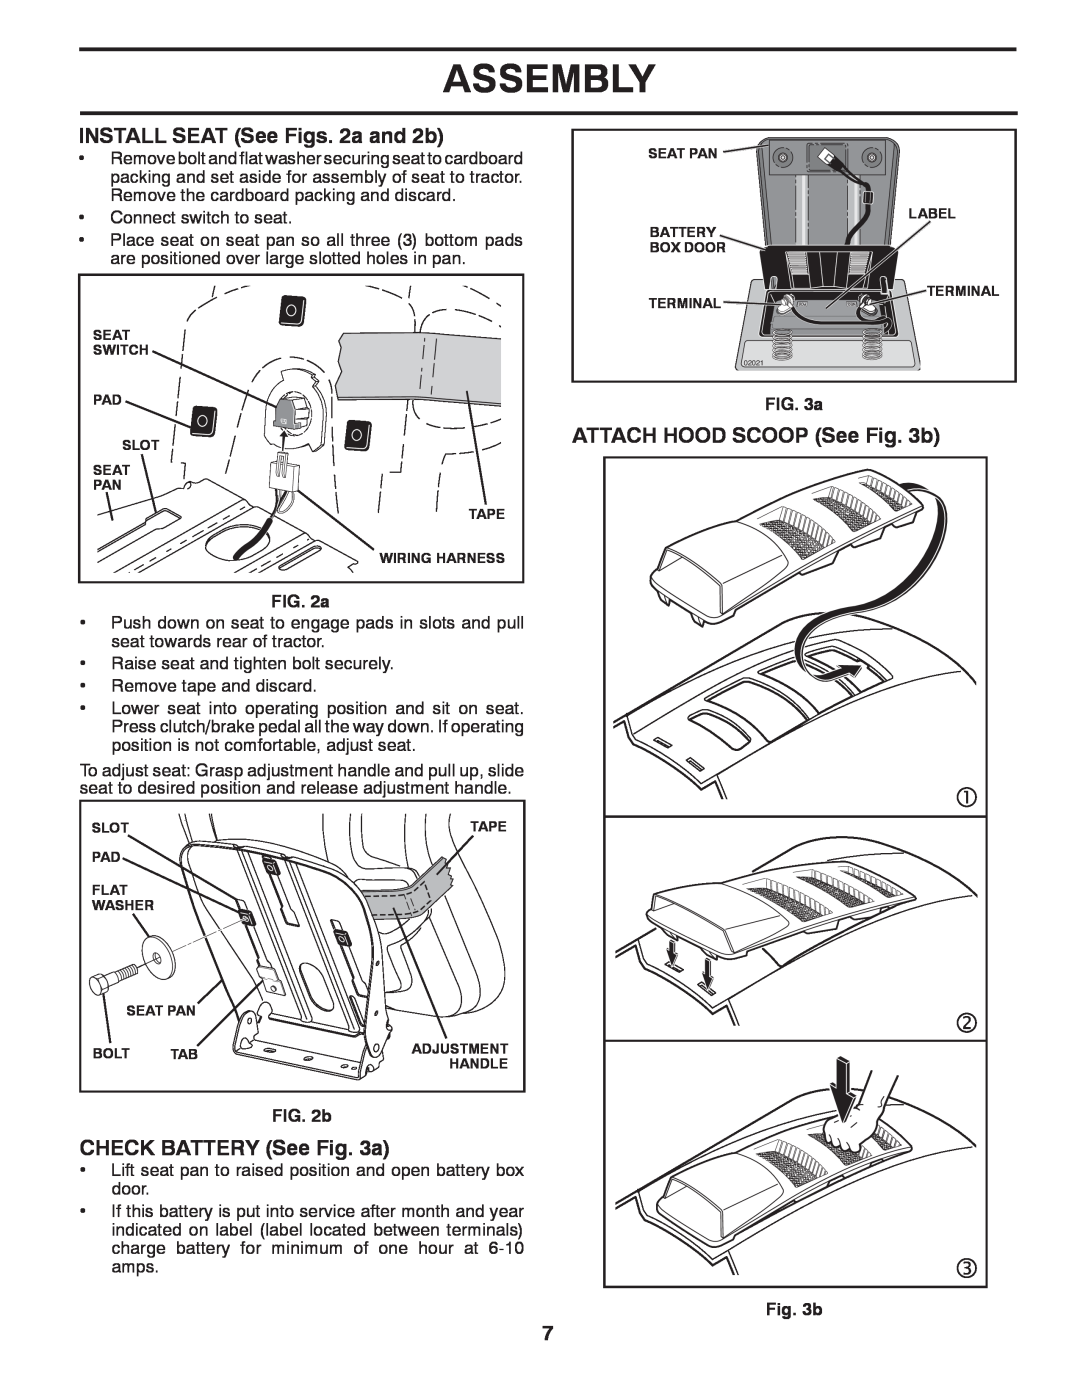 Husqvarna LTH1842 manual INSTALL SEAT See Figs. 2a and 2b, ATTACH HOOD SCOOP See b, CHECK BATTERY See a 